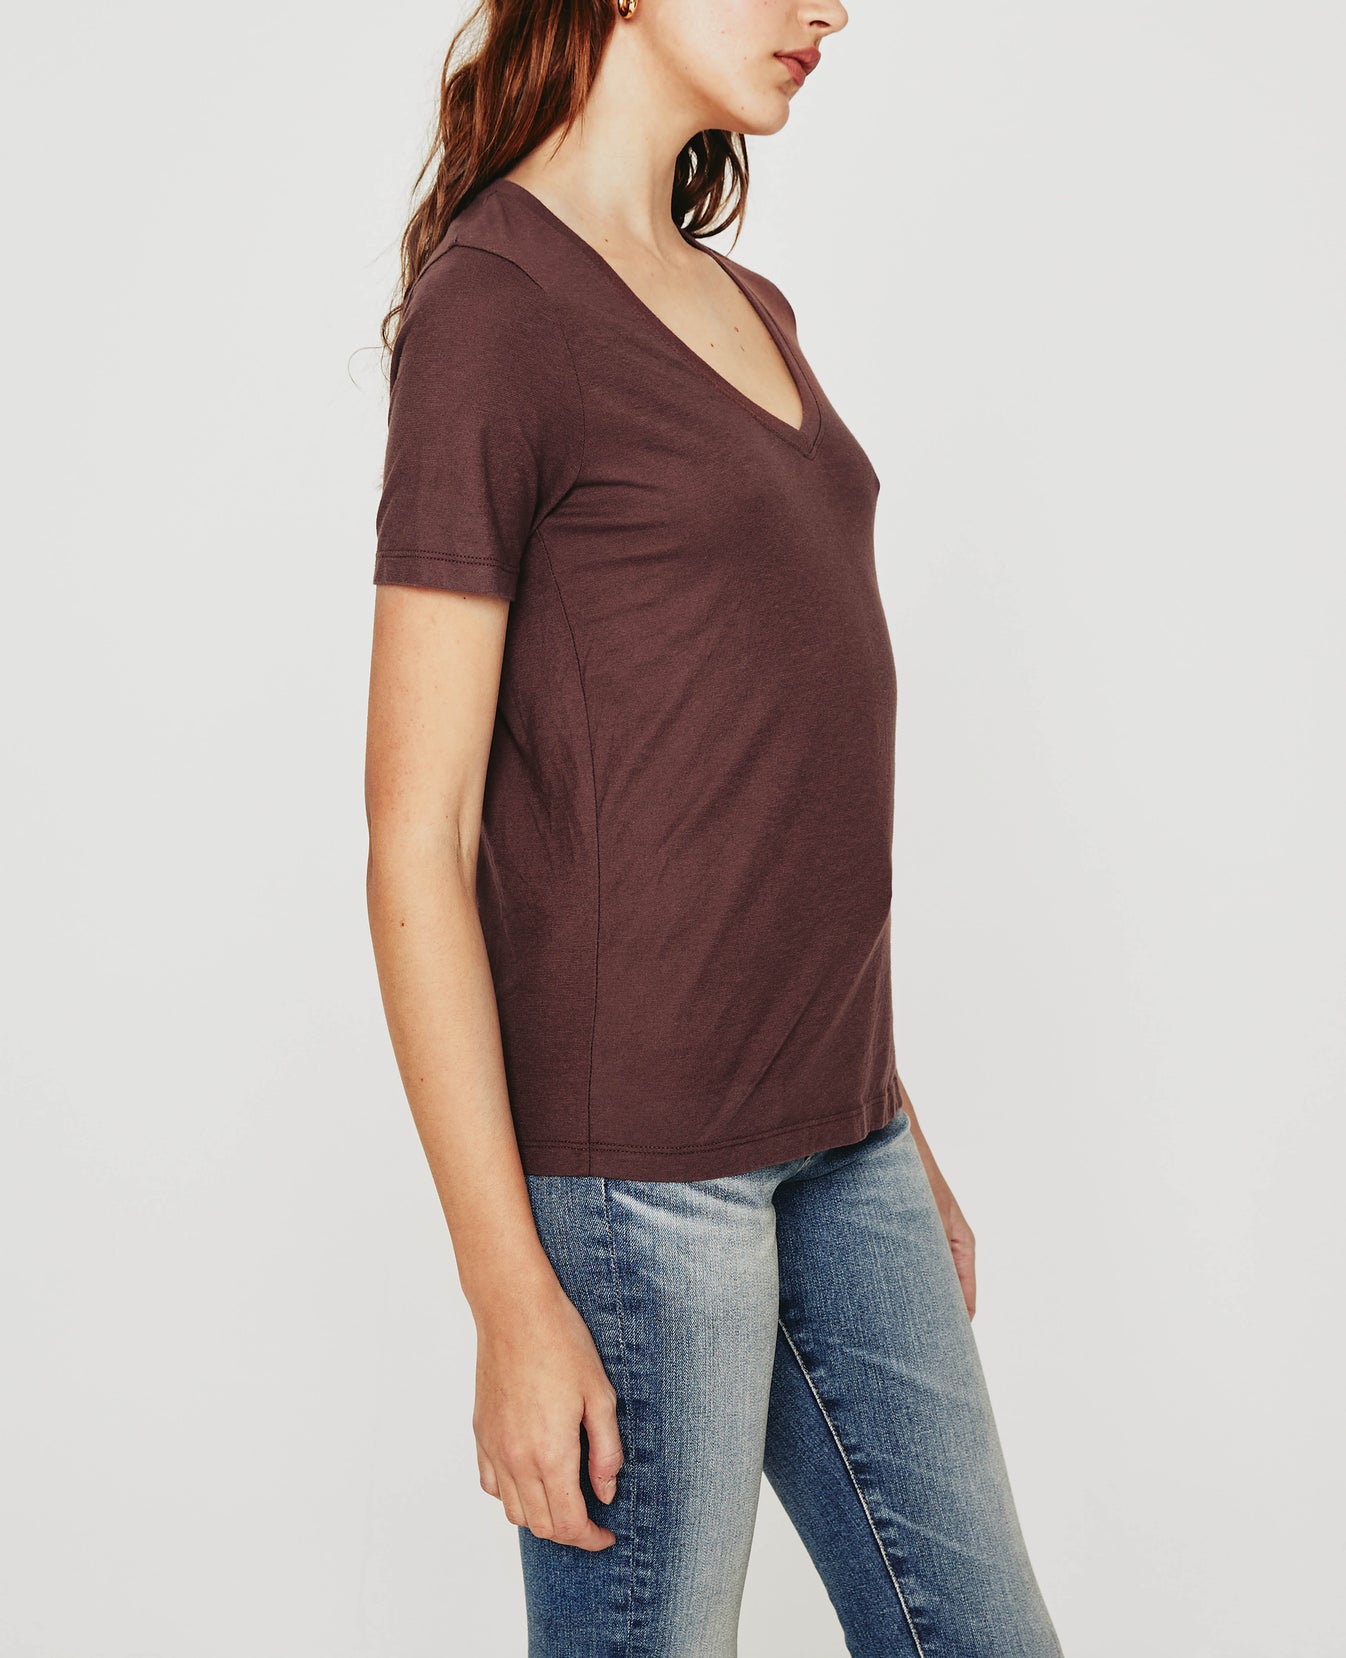 Jagger Vee Passionfruit Classic Fit V-Neck Tee Women Tops Photo 5